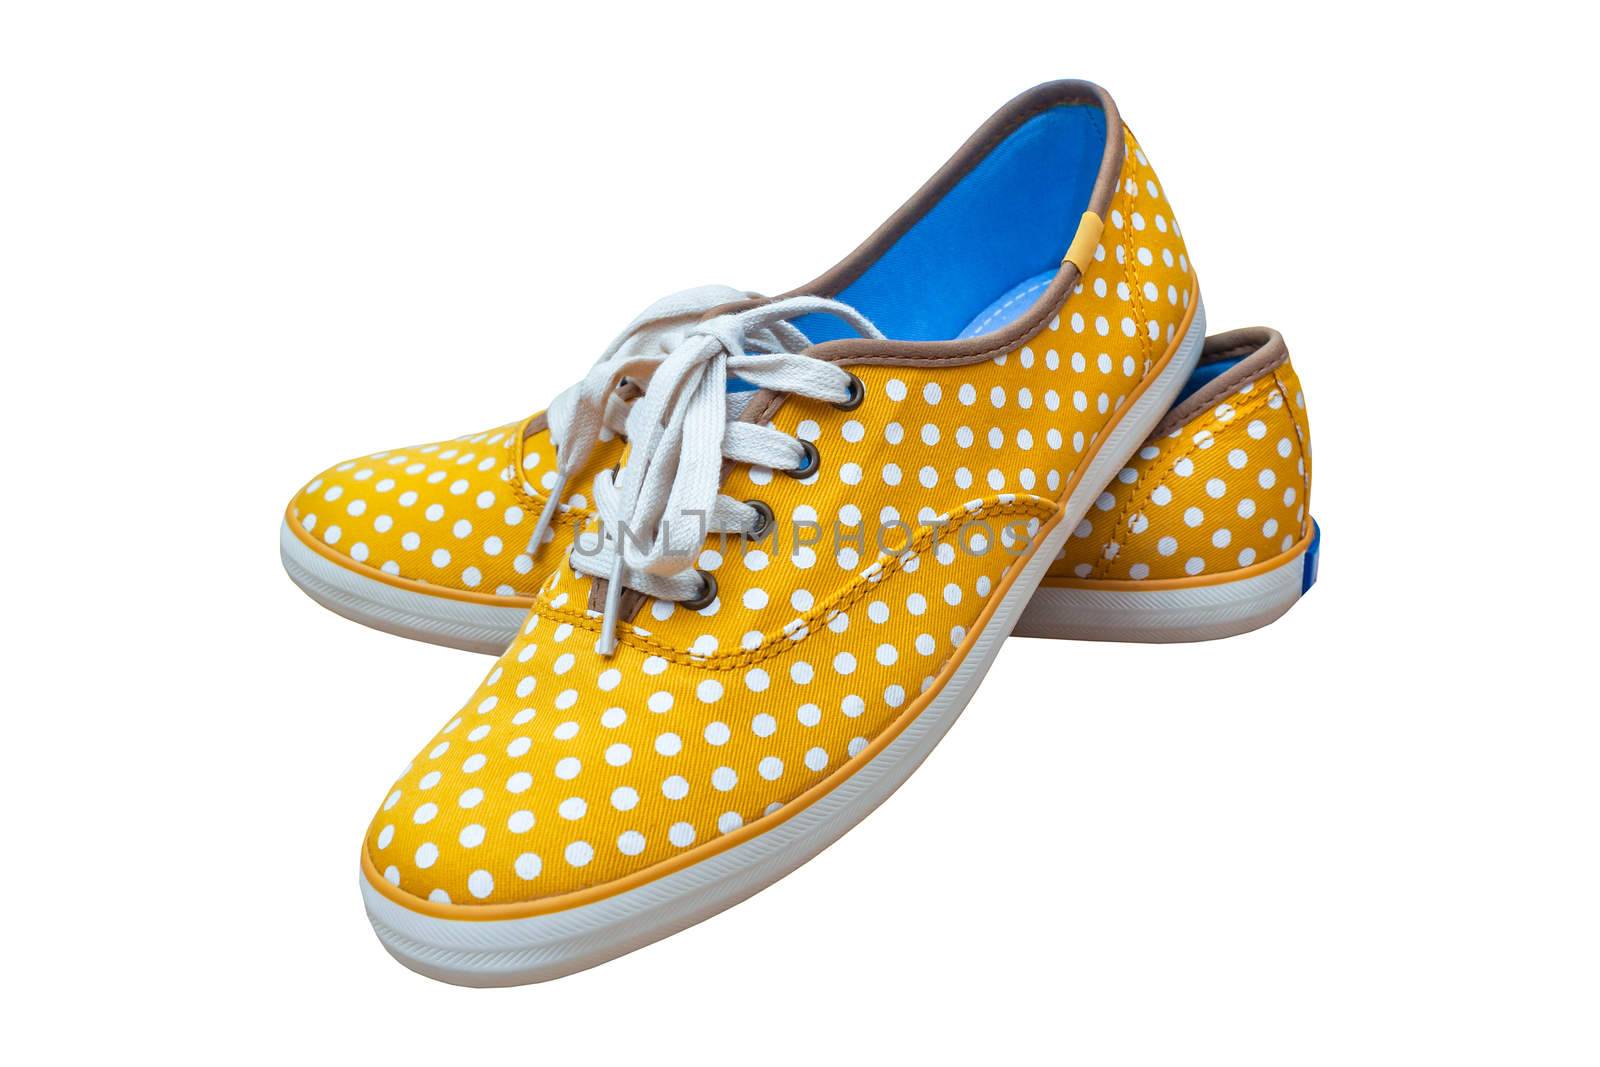 Pair sneakers, vintage dot yellow color  isolated on white backg by FrameAngel